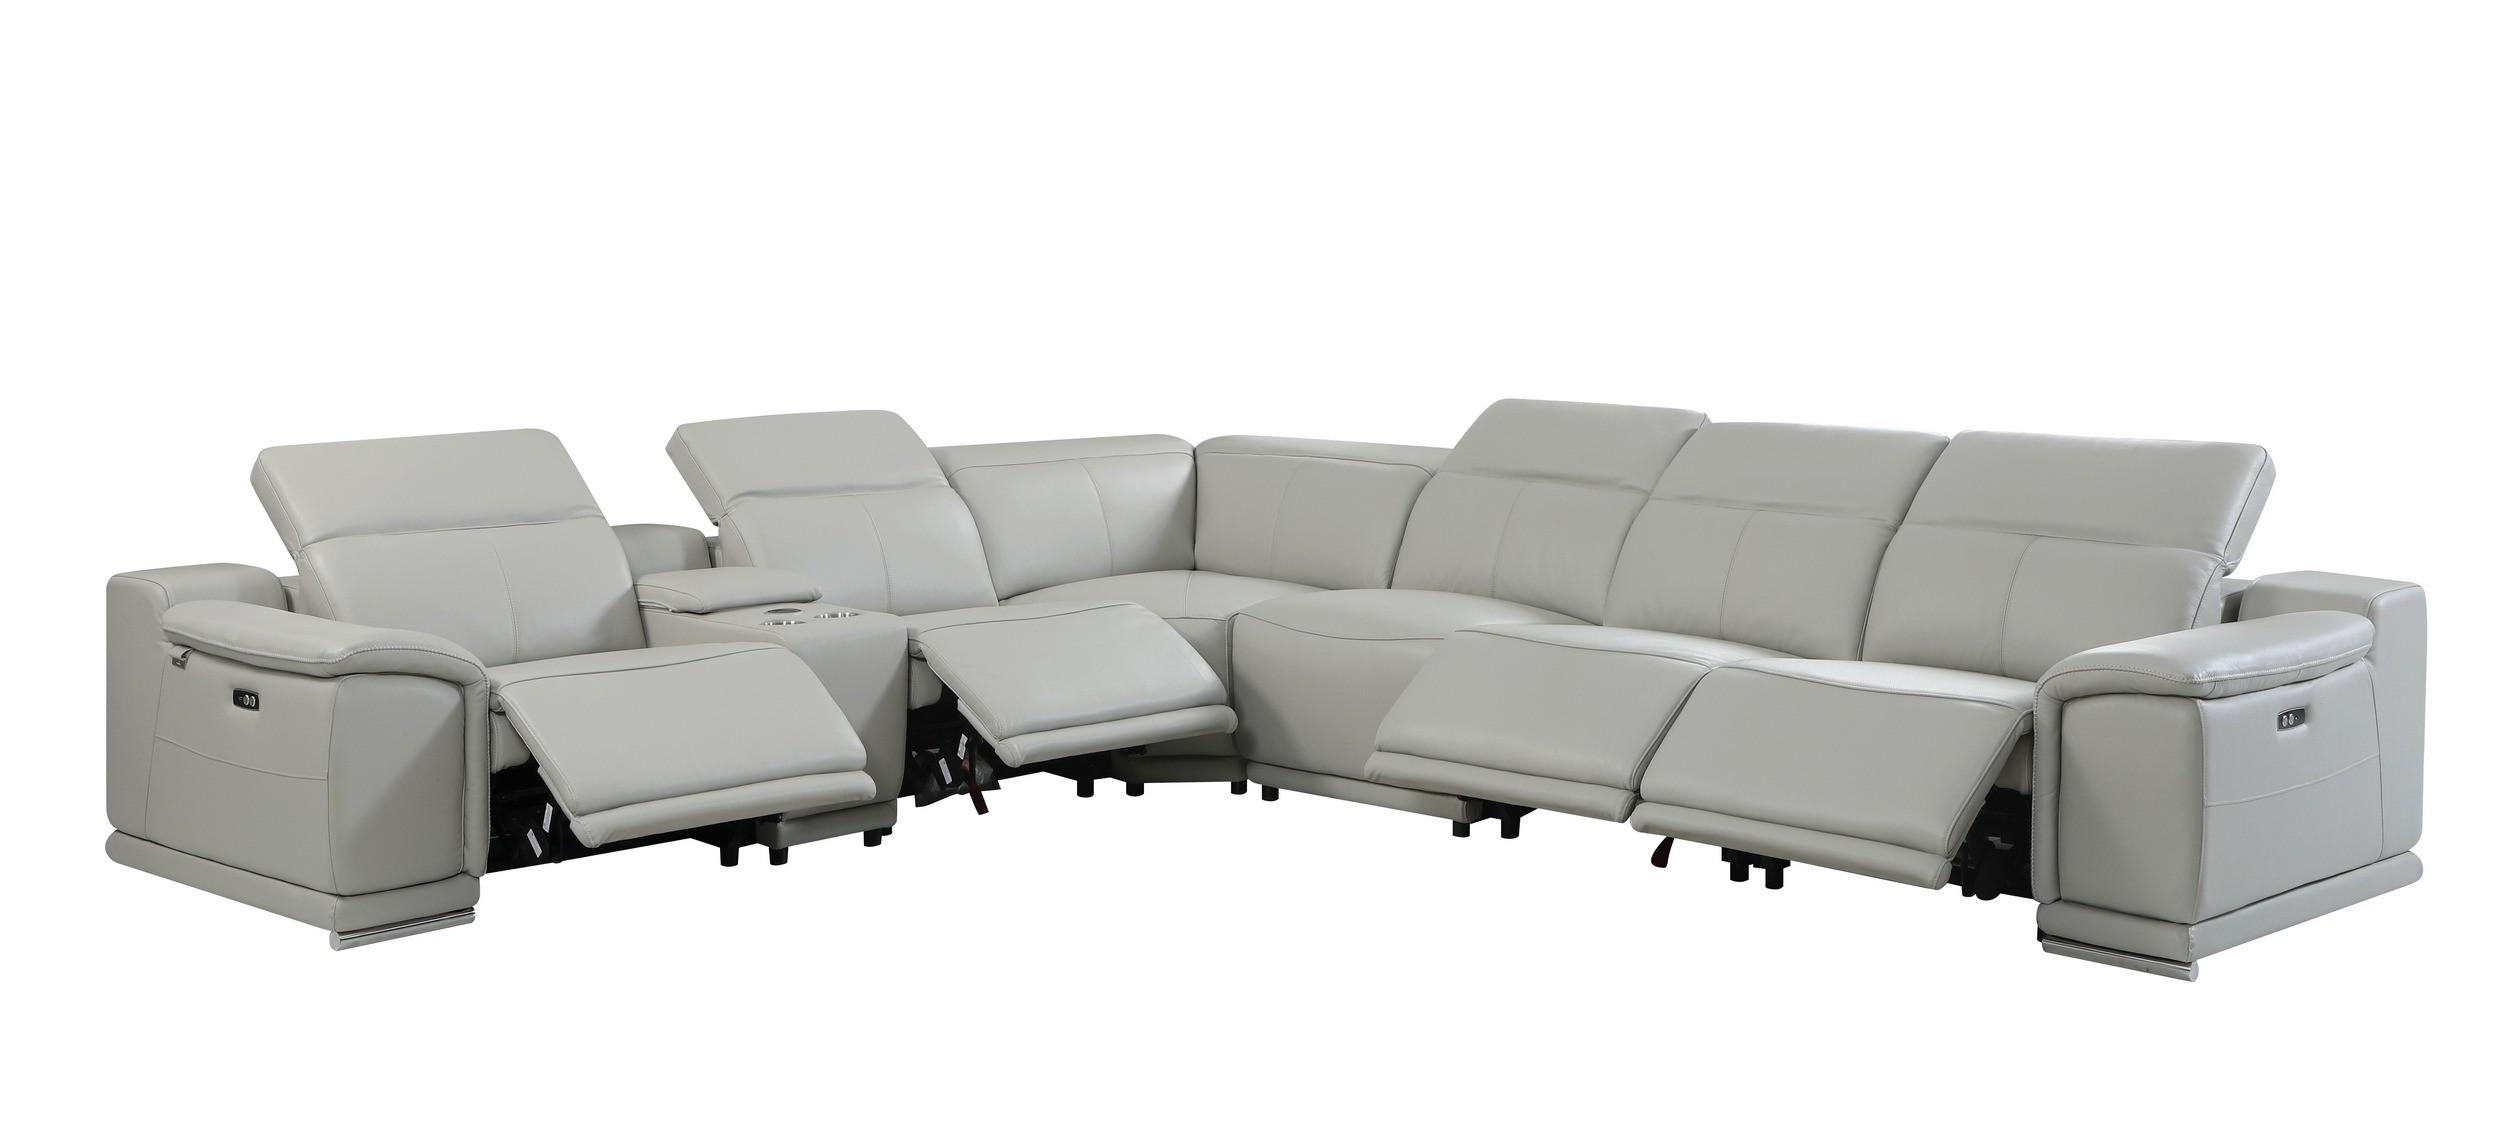 

    
LIGHT GRAY 4-Power Reclining 7PC Sectional w/ 1-Console 9762 Global United
